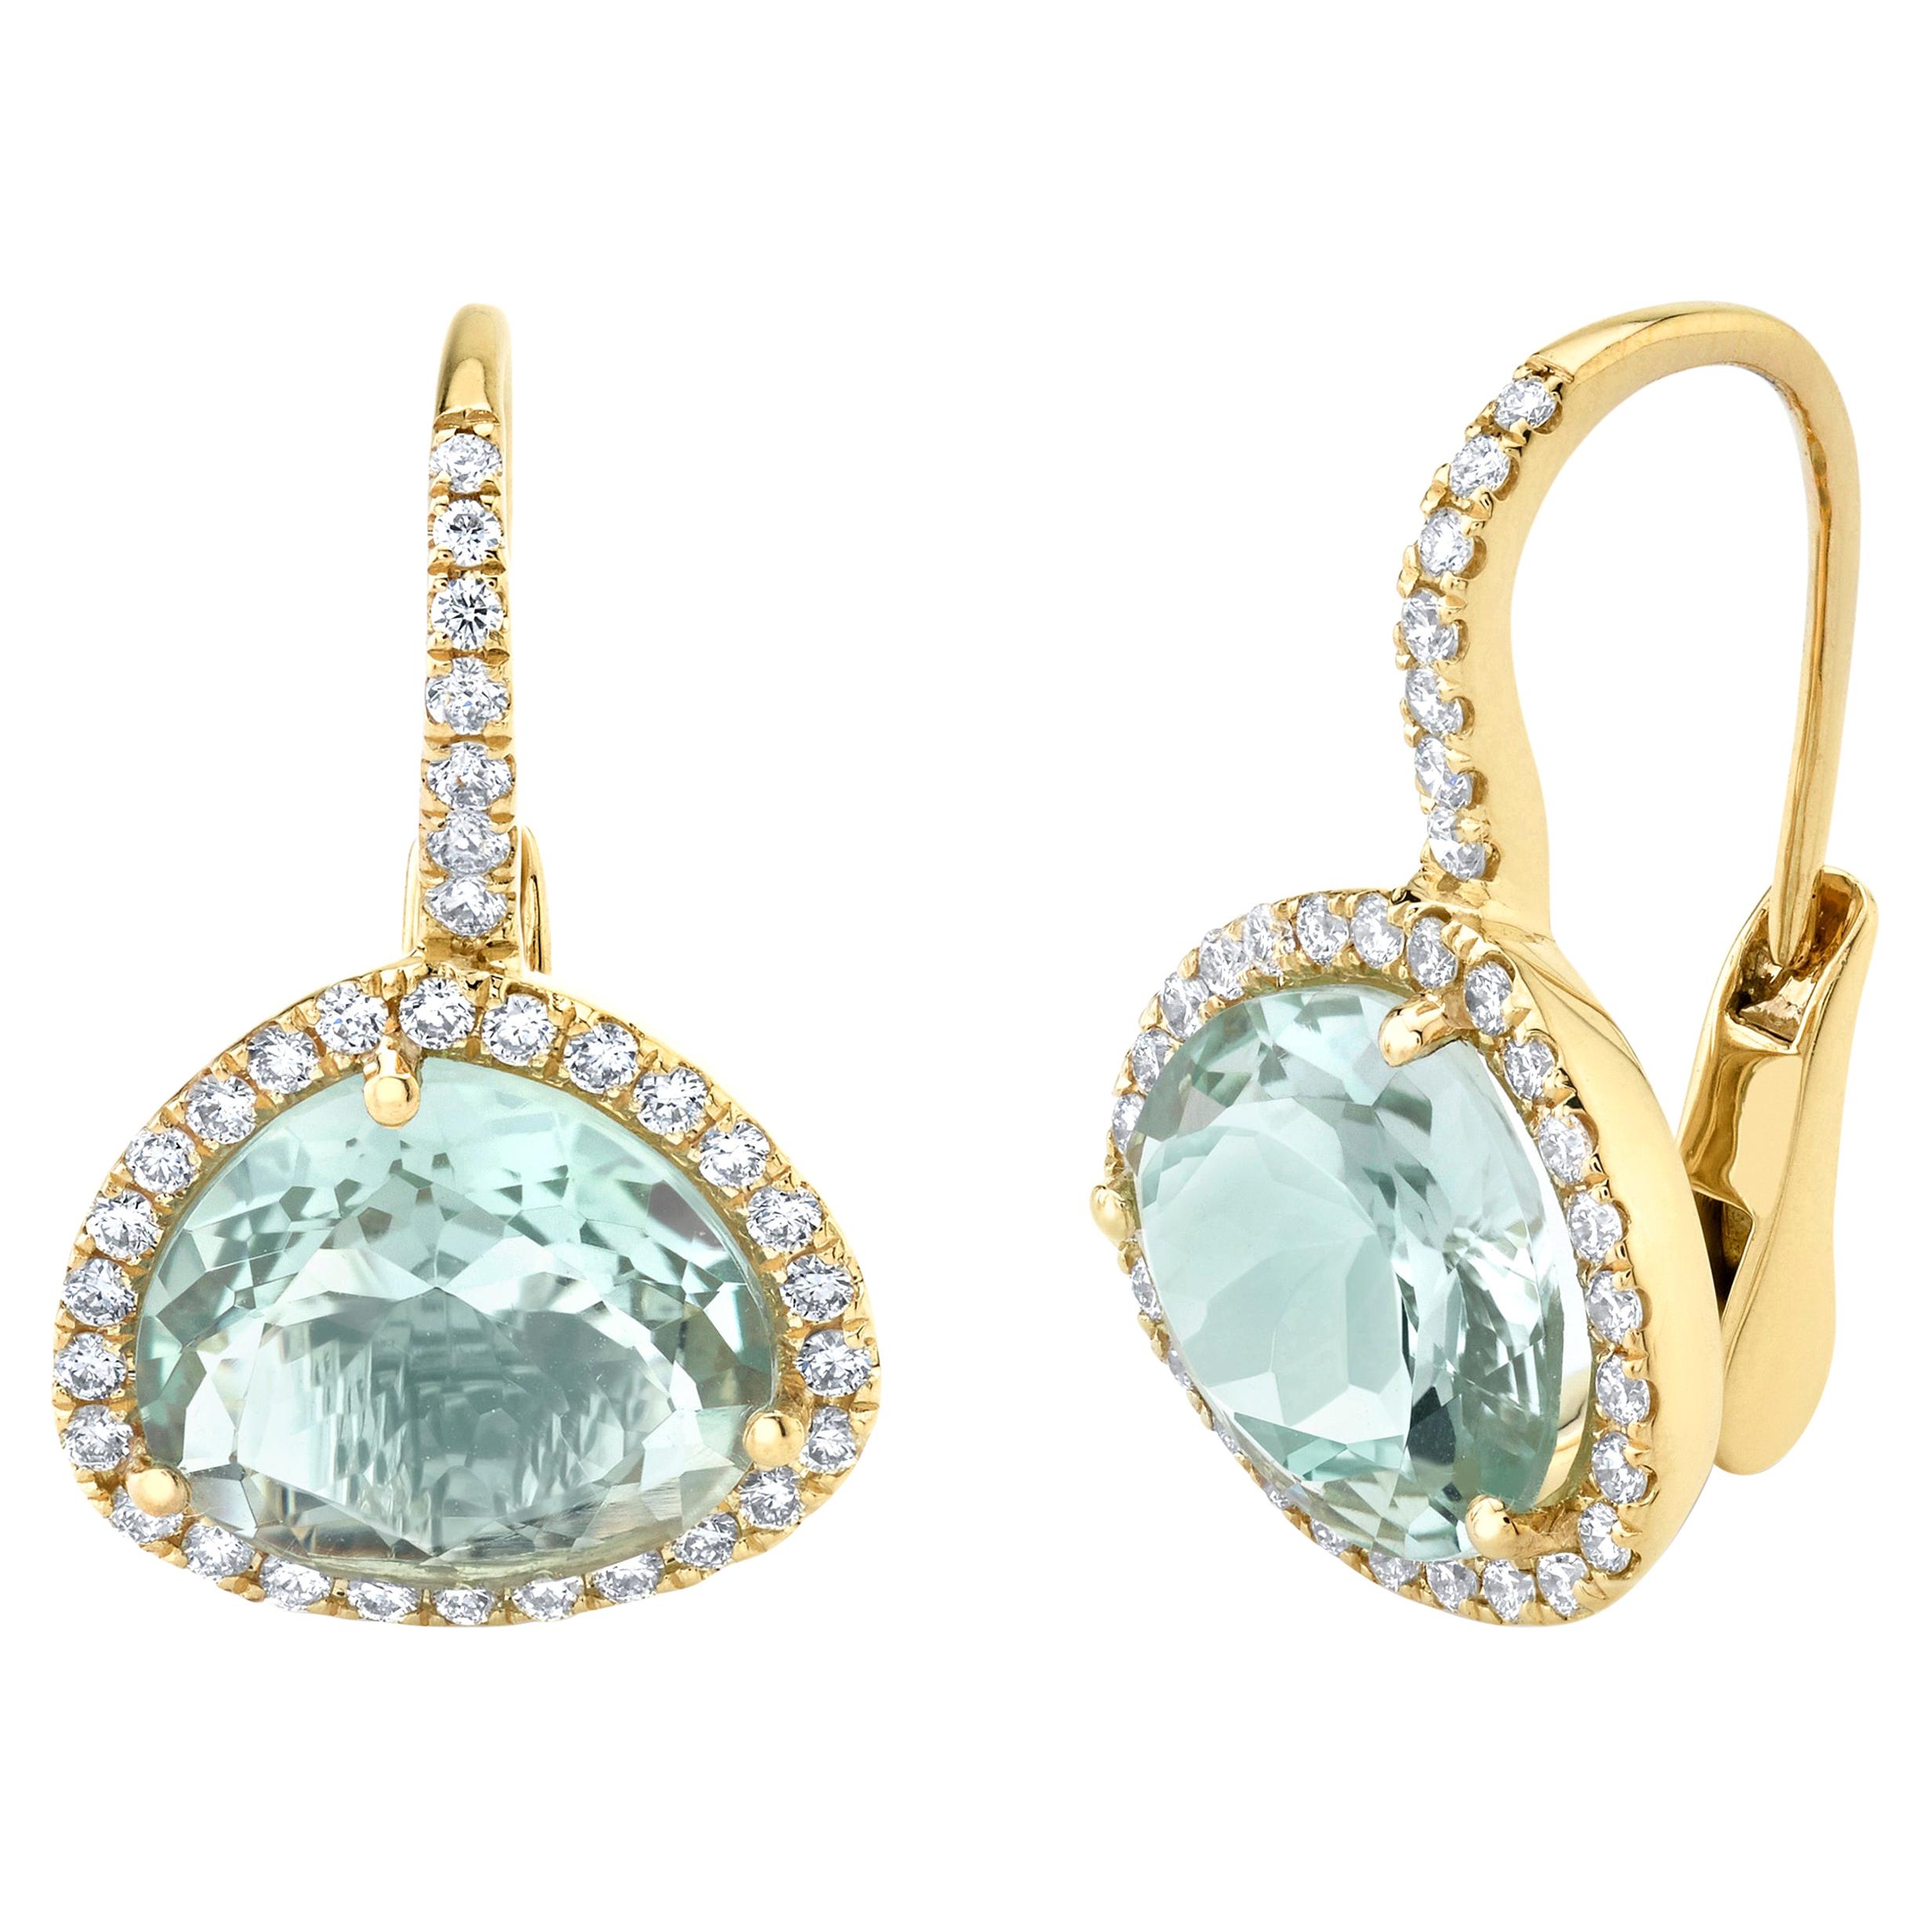 Blue Topaz and Diamond Halo Drop Earrings in Yellow Gold, 5.49 Carats Total